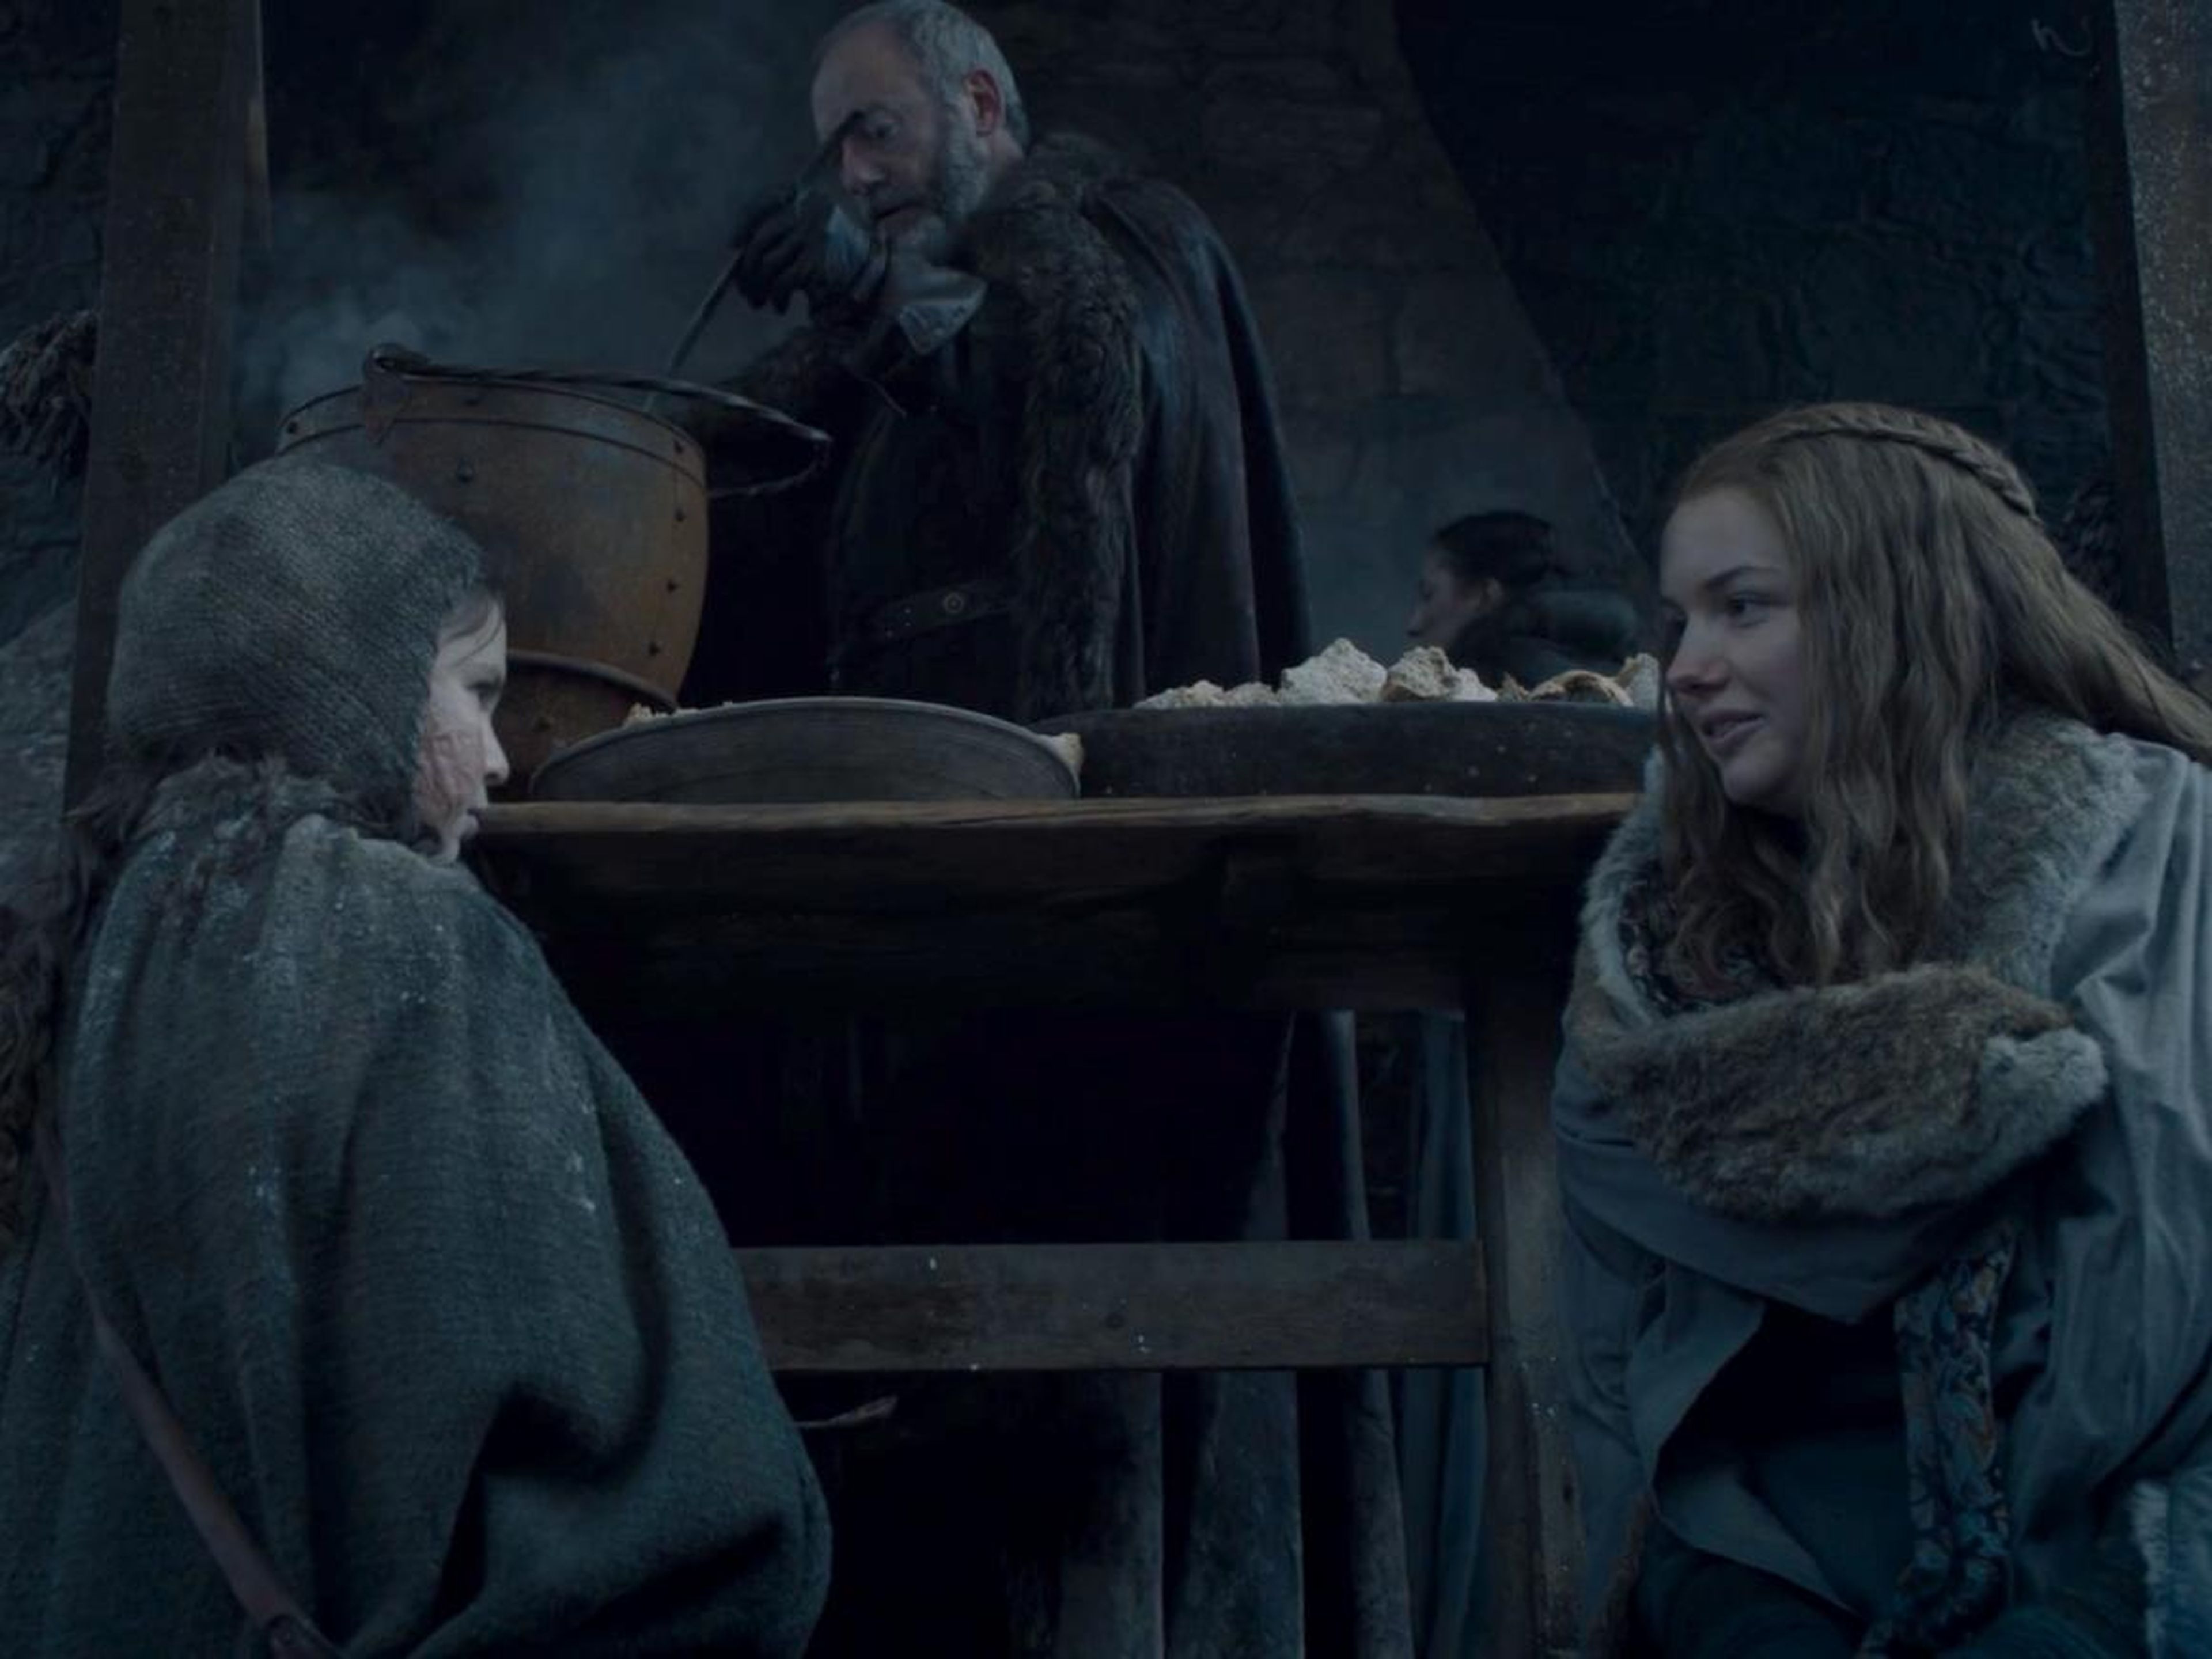 A little Winterfell girl, Ser Davos, and Gilly on "Game of Thrones."